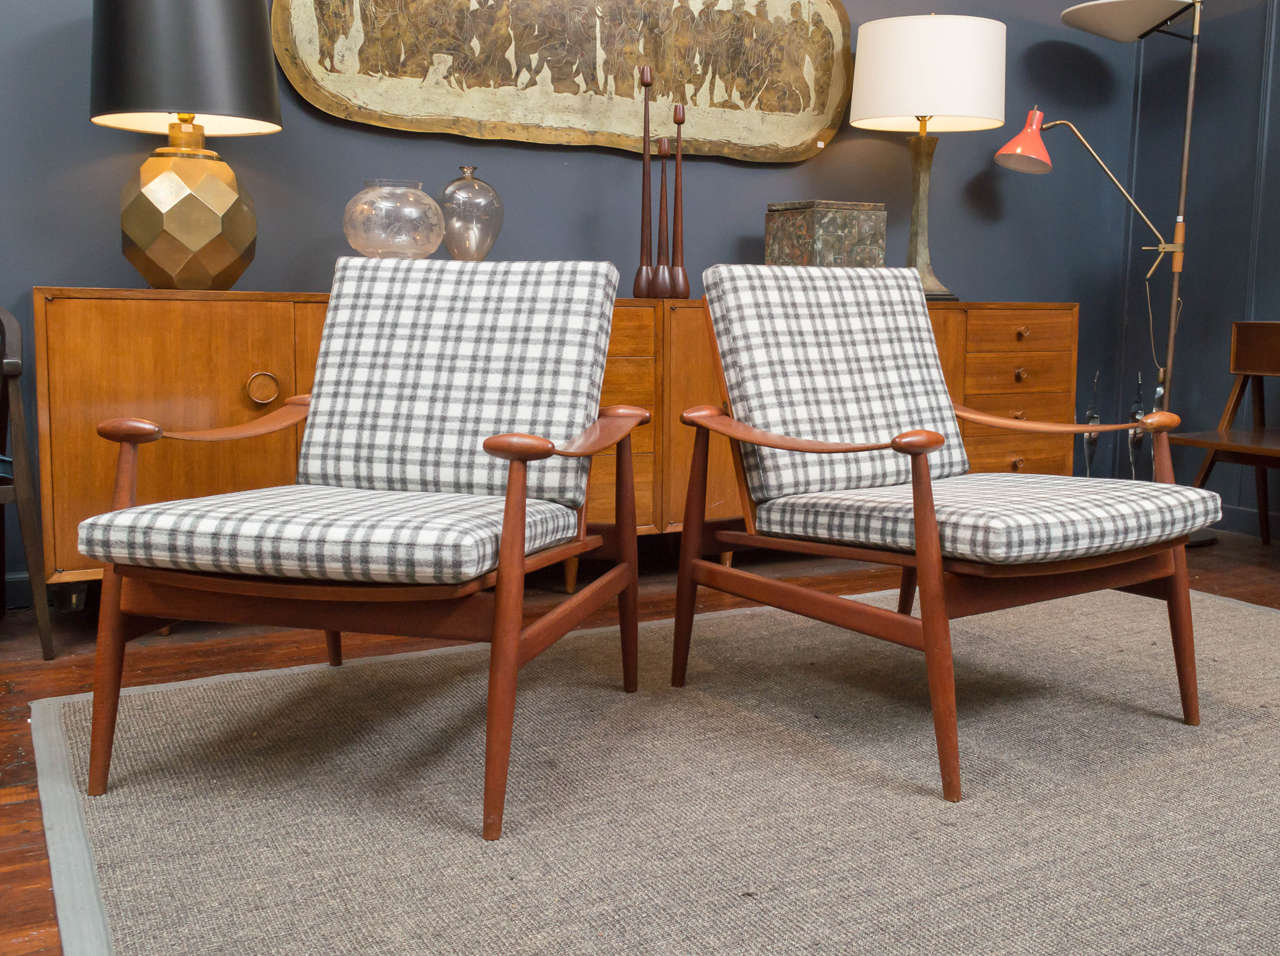 Finn Juhl design model #133 lounge chairs.
Sculpted frames made from solid teak with newly upholstered plaid wool cushions. 
Manufactured by FD, Denmark. In excellent vintage condition, stamped.